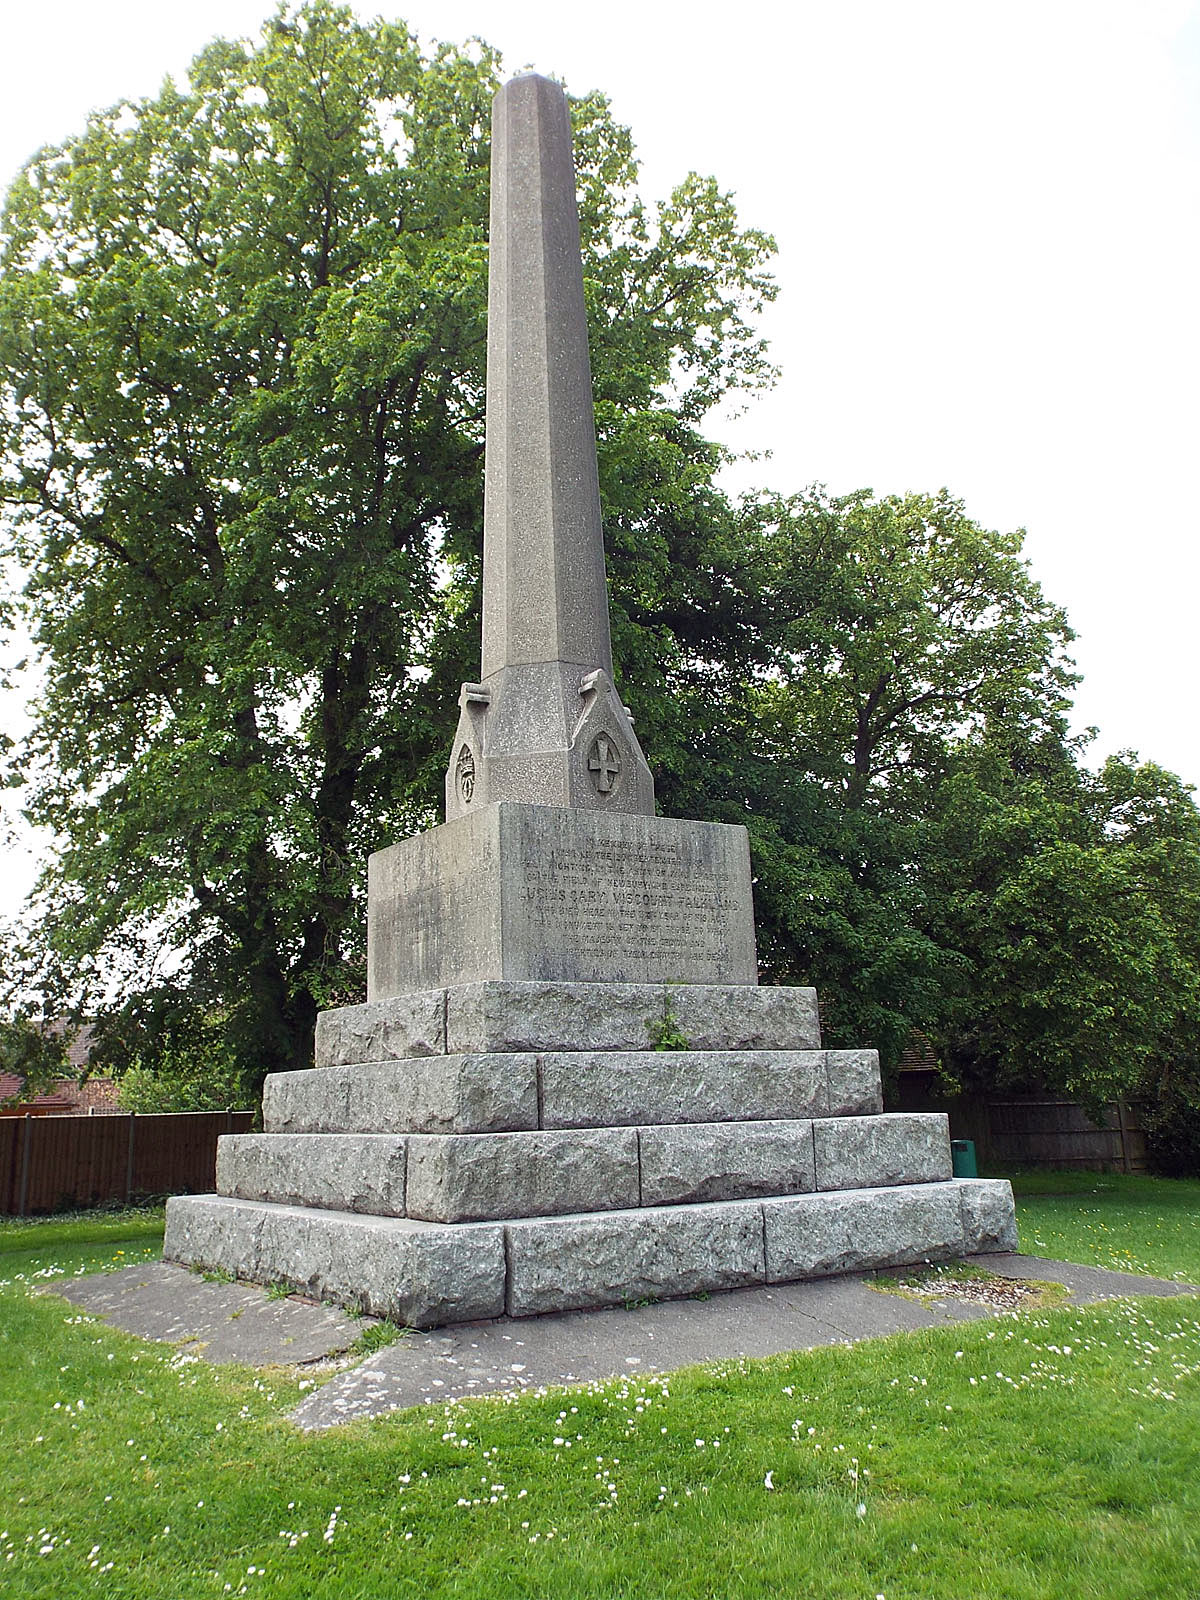 Falkland Memorial in Newbury commemorating the death of Lucius Cary 2nd Viscount Falkland and the Royalist casualties at the First Battle of Newbury on 20th September 1643 in the English Civil War